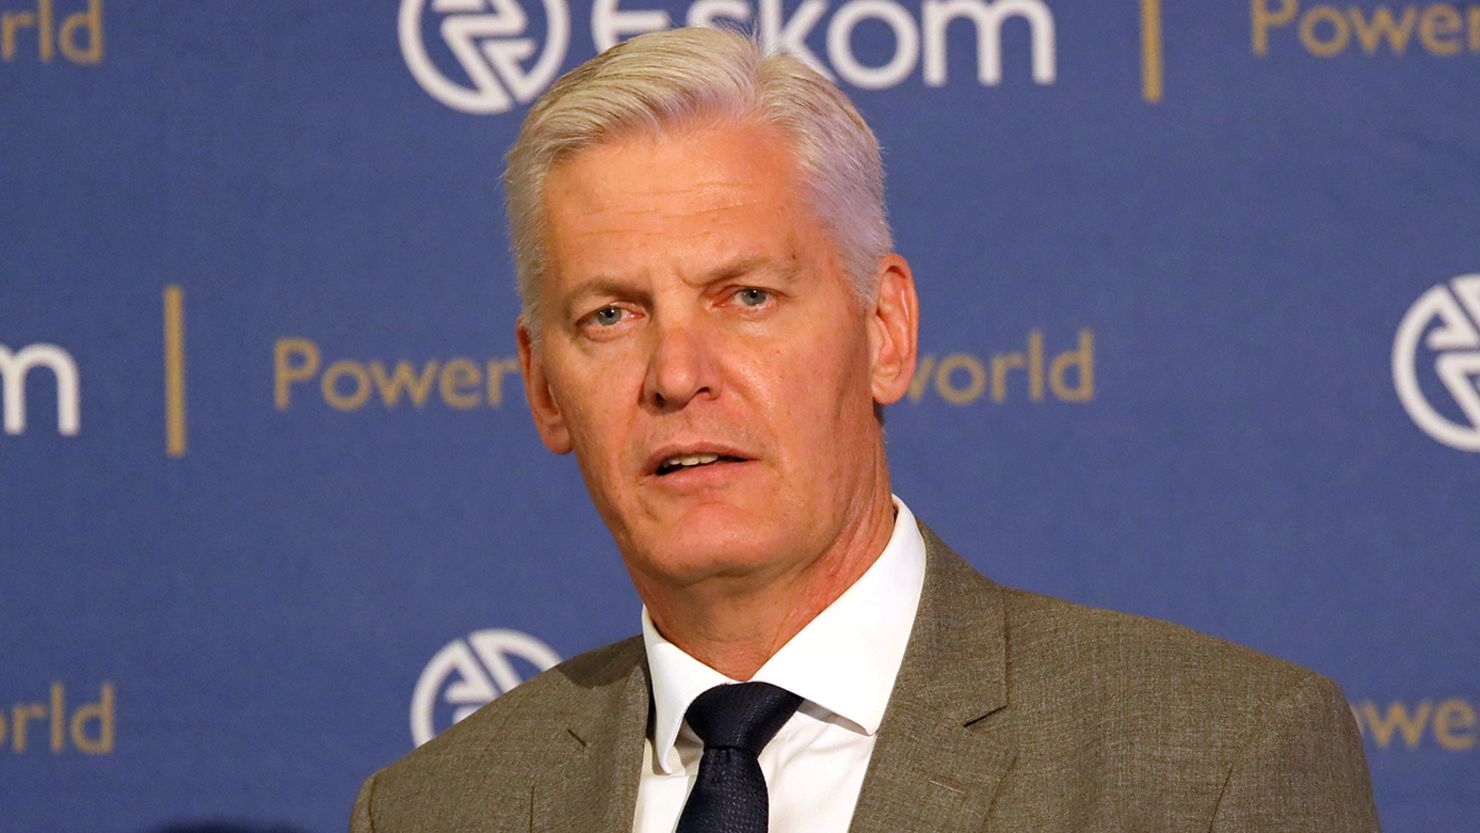 Andre de Ruyter resigned as group chief executive of South Africa's state-owned power utility Eskom in December but will remain in the post until the end of March.